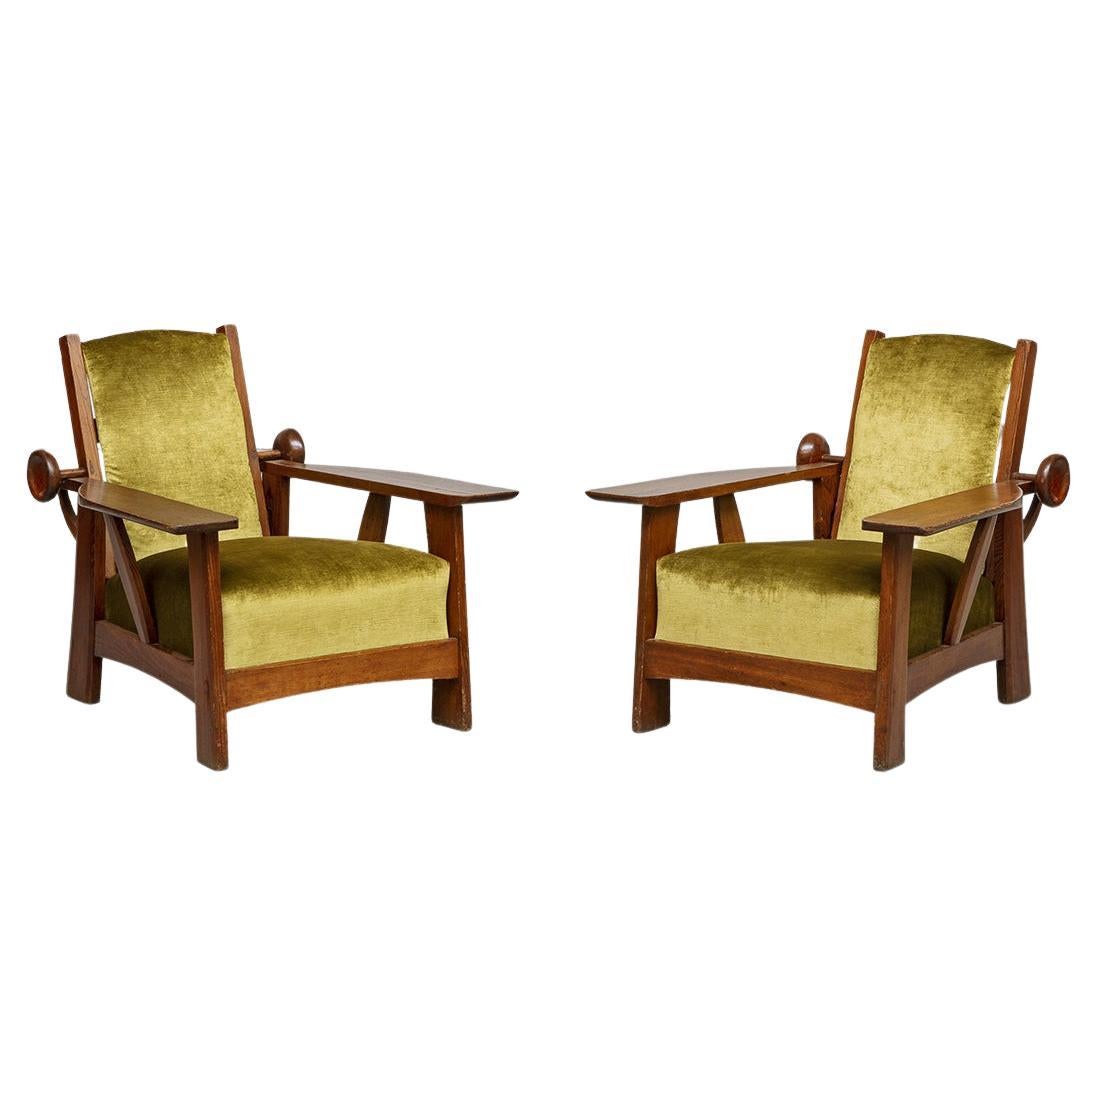 Golden Green Velvet Adjustable Armchairs in Pitch Pine Clemens Holzmeister, 1930 For Sale